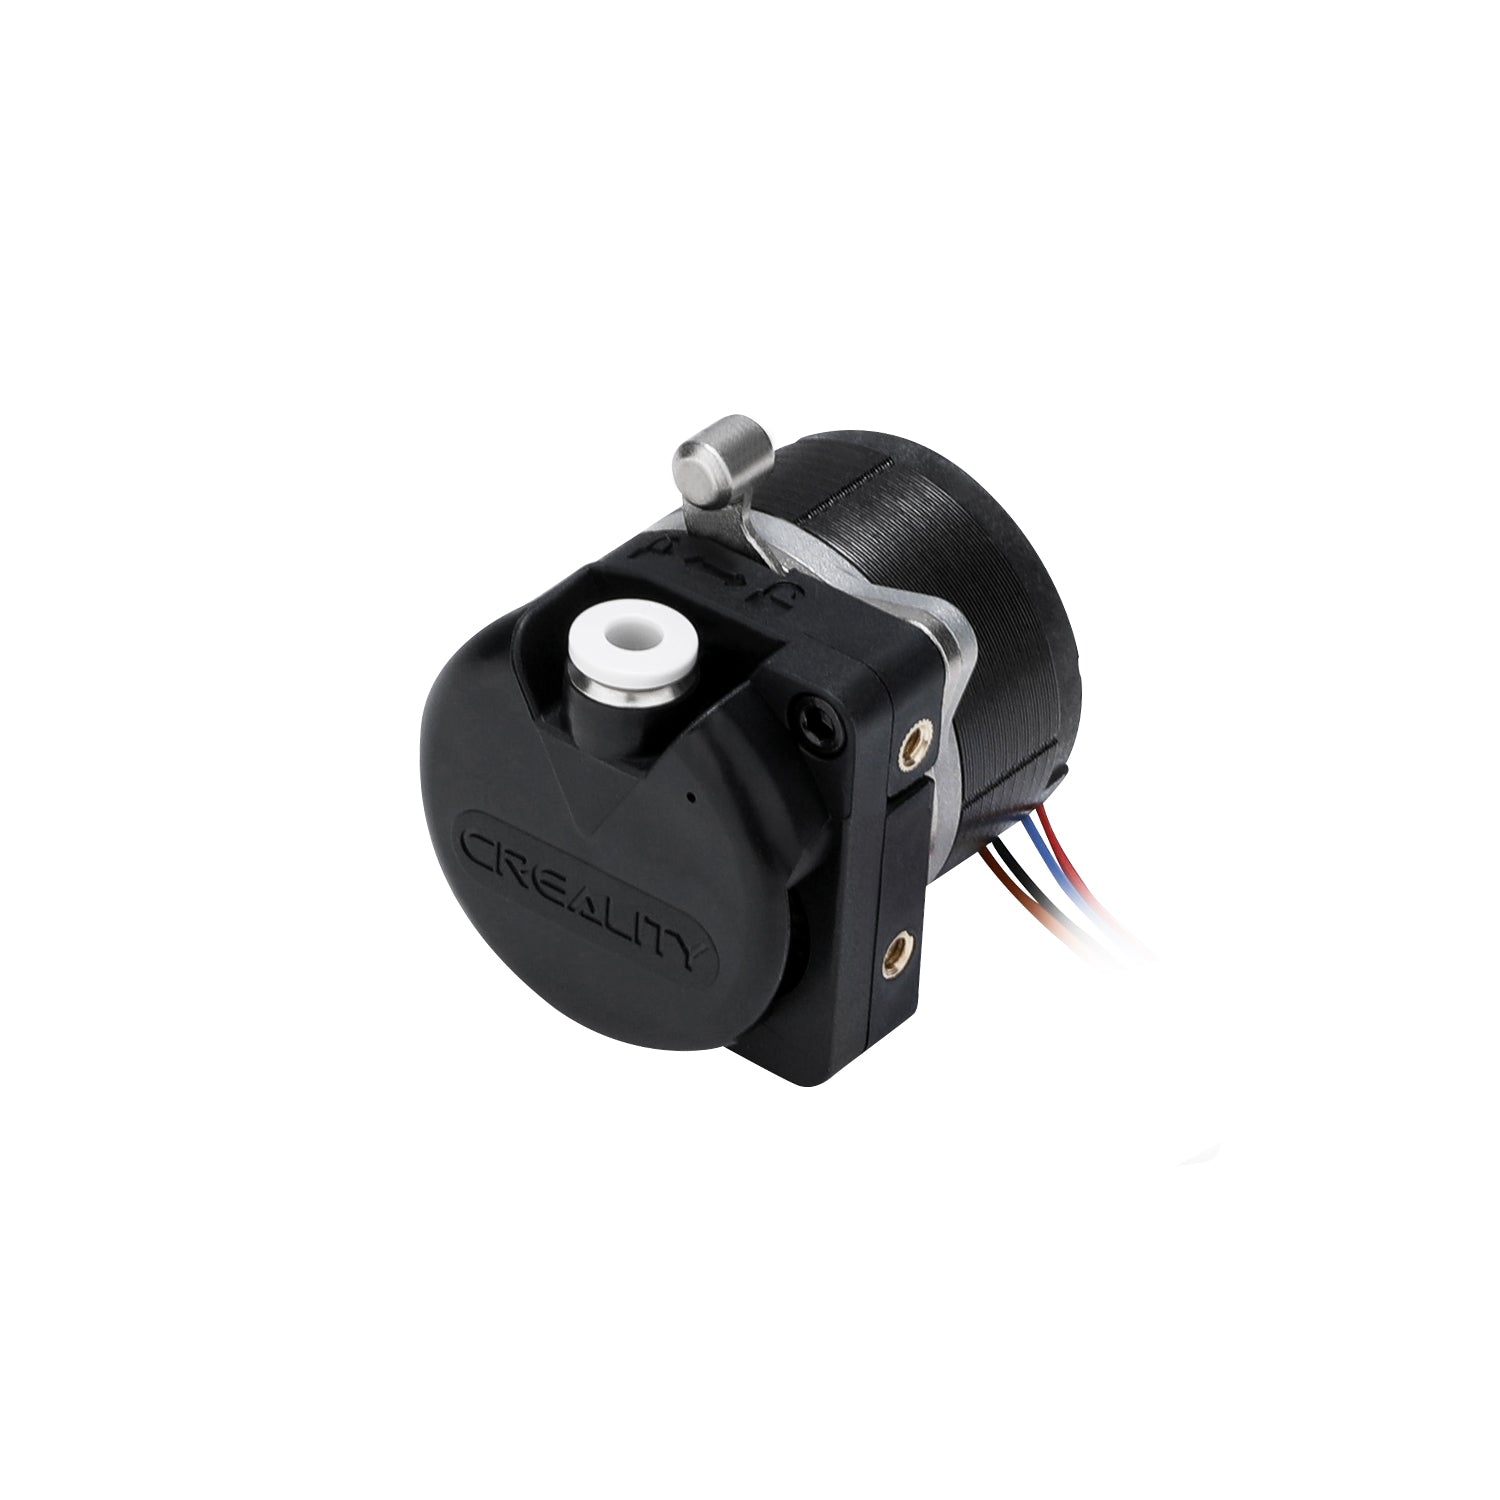 Creality K1/K1 Max Replacement Extruder /w Moon Motor